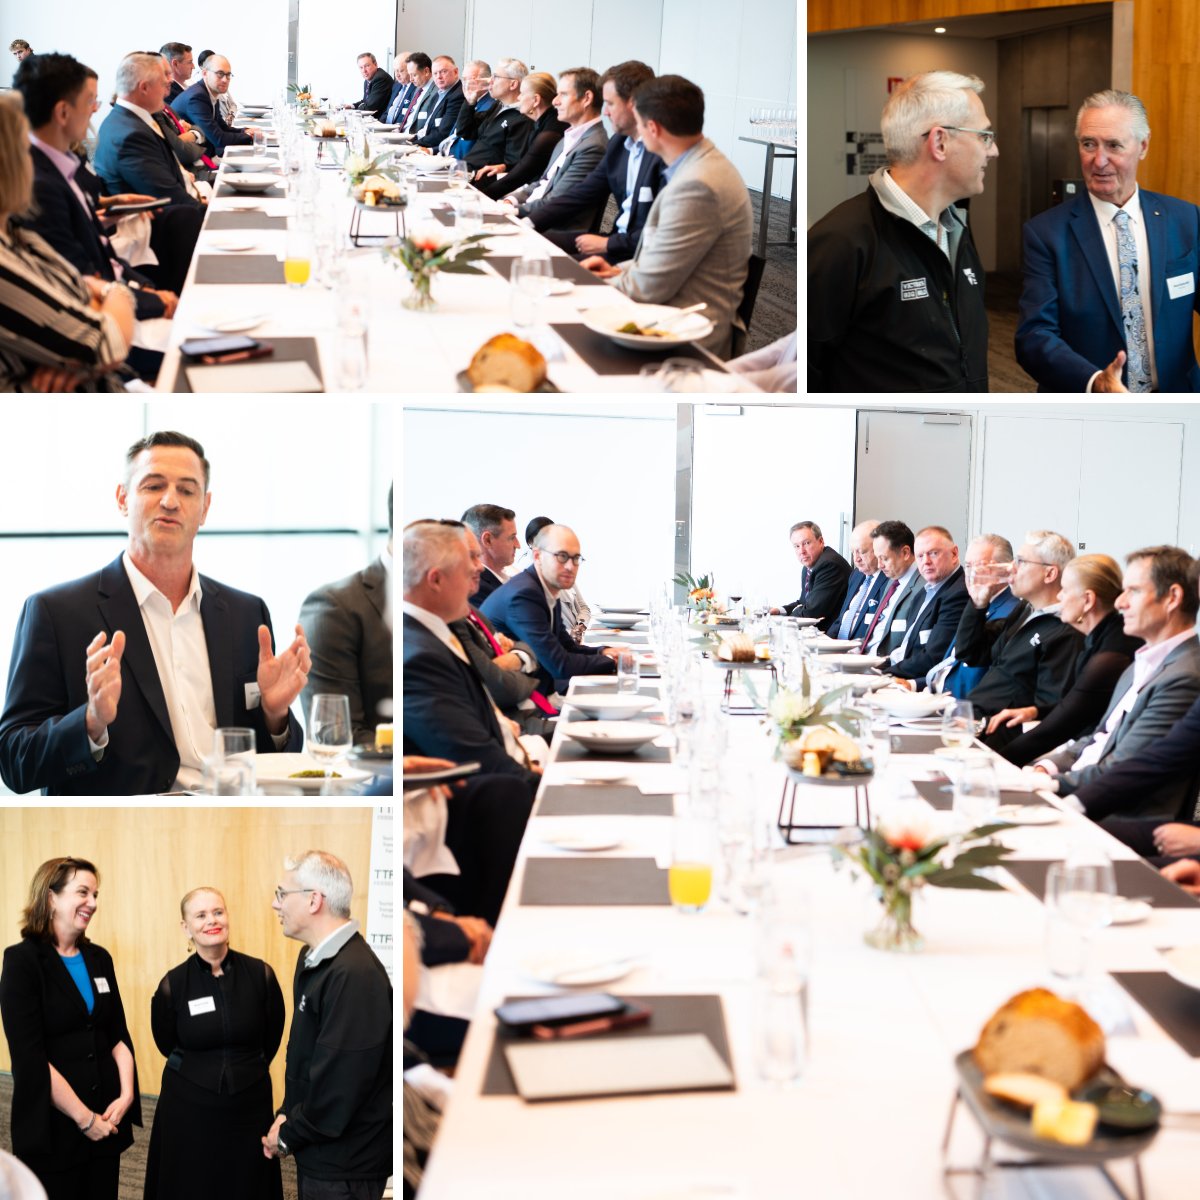 Thank you to Victoria's Transport Infrastructure Minister @DannyPearsonMP for joining @TTFAus' Leaders Luncheon in Melbourne. Thanks too to our wonderful event partners GoZero Group and host Melbourne Convention & Exhibition Centre. See all photos at flic.kr/s/aHBqjBpx25📸